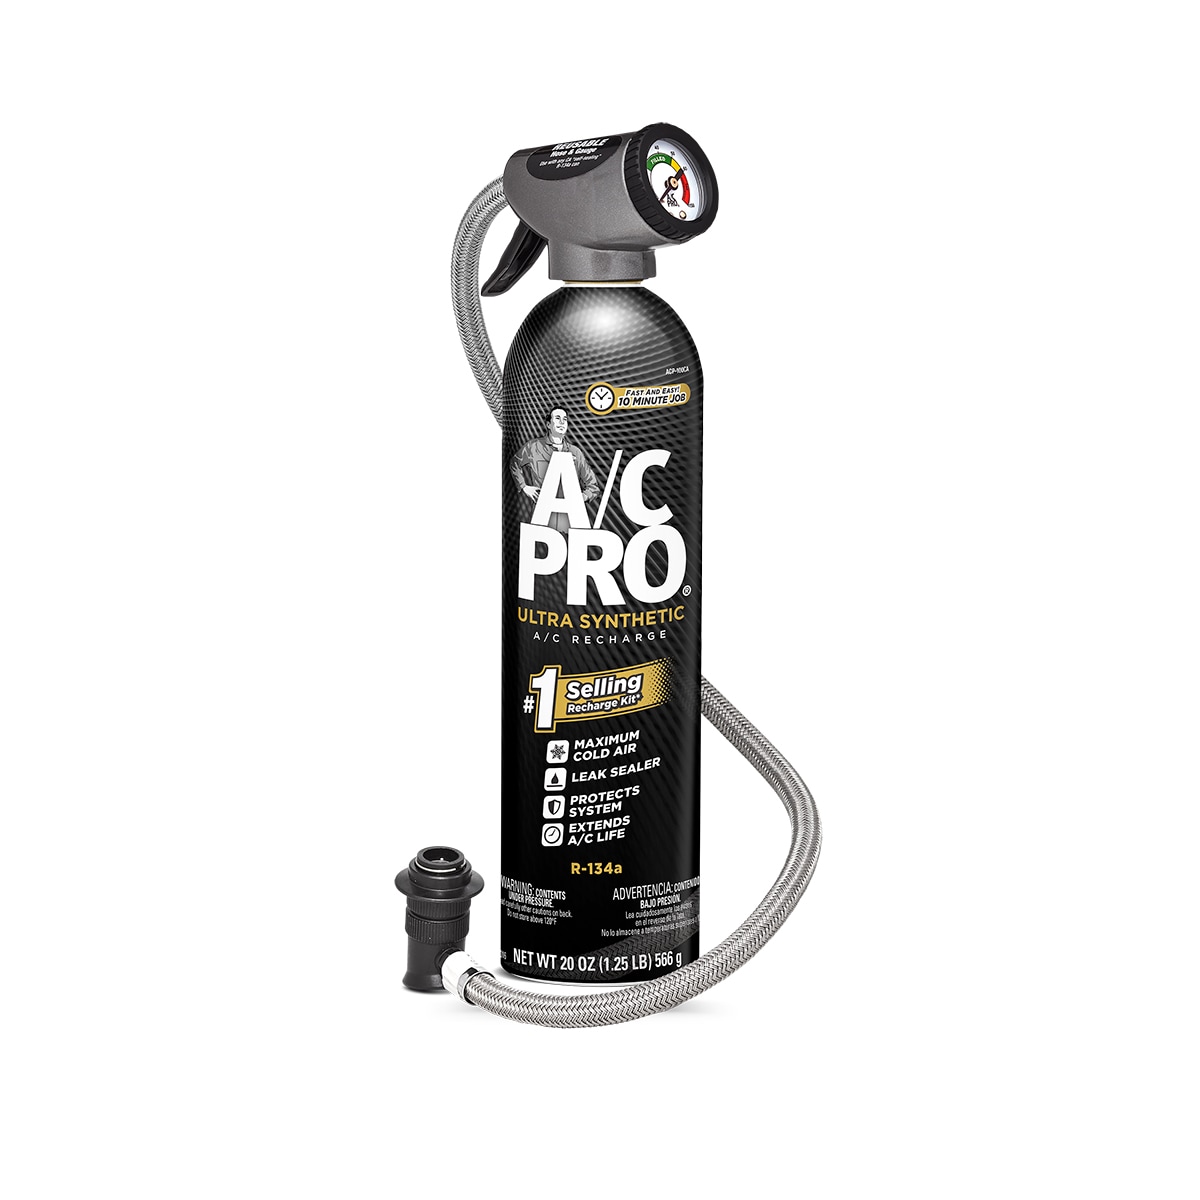 For Dometic Marine A/C R410a Refrigerant Recharge Kit, 28 oz., Check &  Charge-It on eBid United States | 215873462